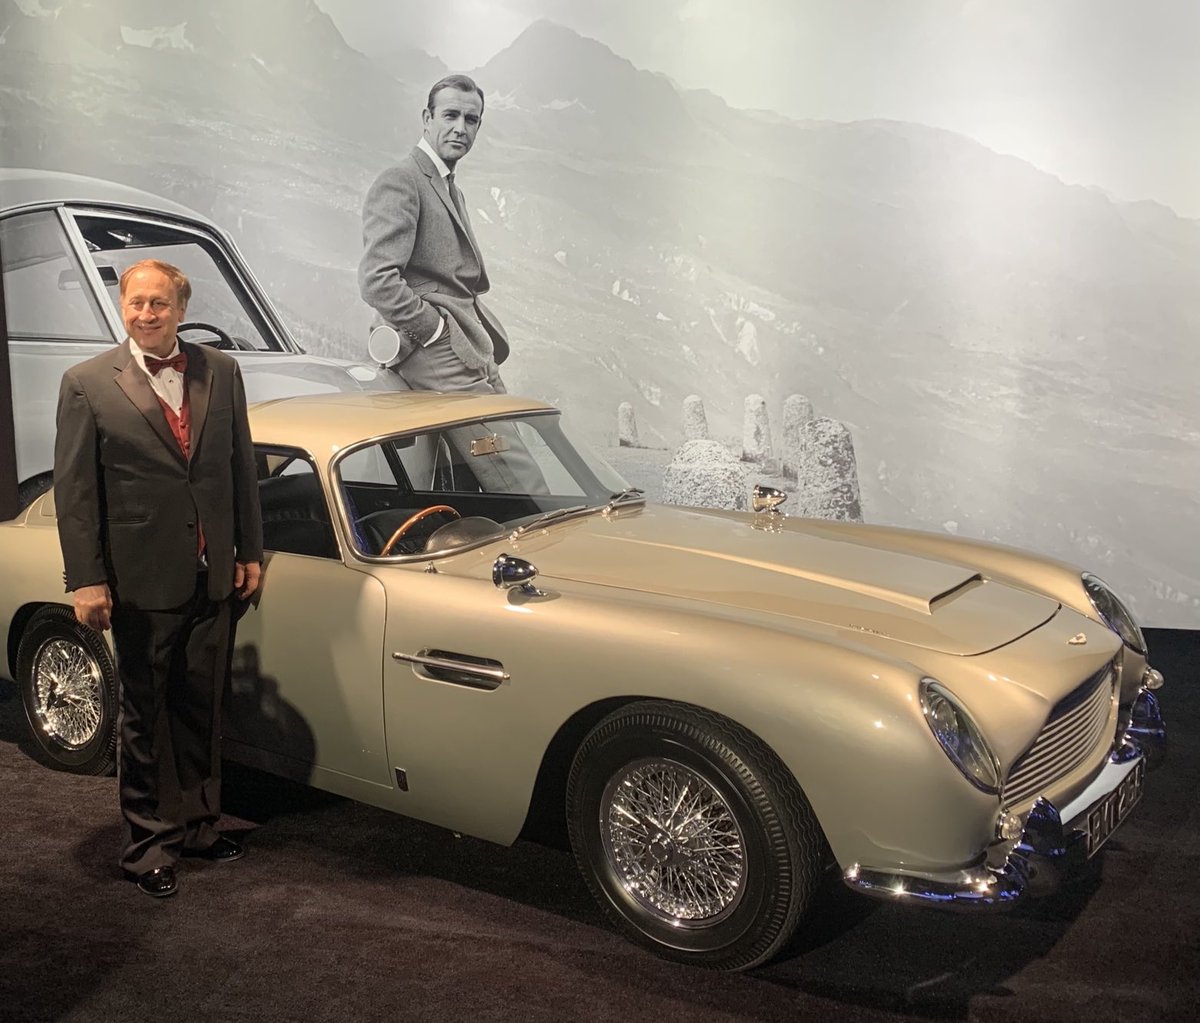 I am at a charity dinner in Los Angeles honoring Barbara Broccoli and Michael Wilson, longtime producers of the James Bond movies over several decades. Here I am next to a Bond-era baby blue Aston Martin. Similar to what he drove in Goldfinger,  circa 1964.